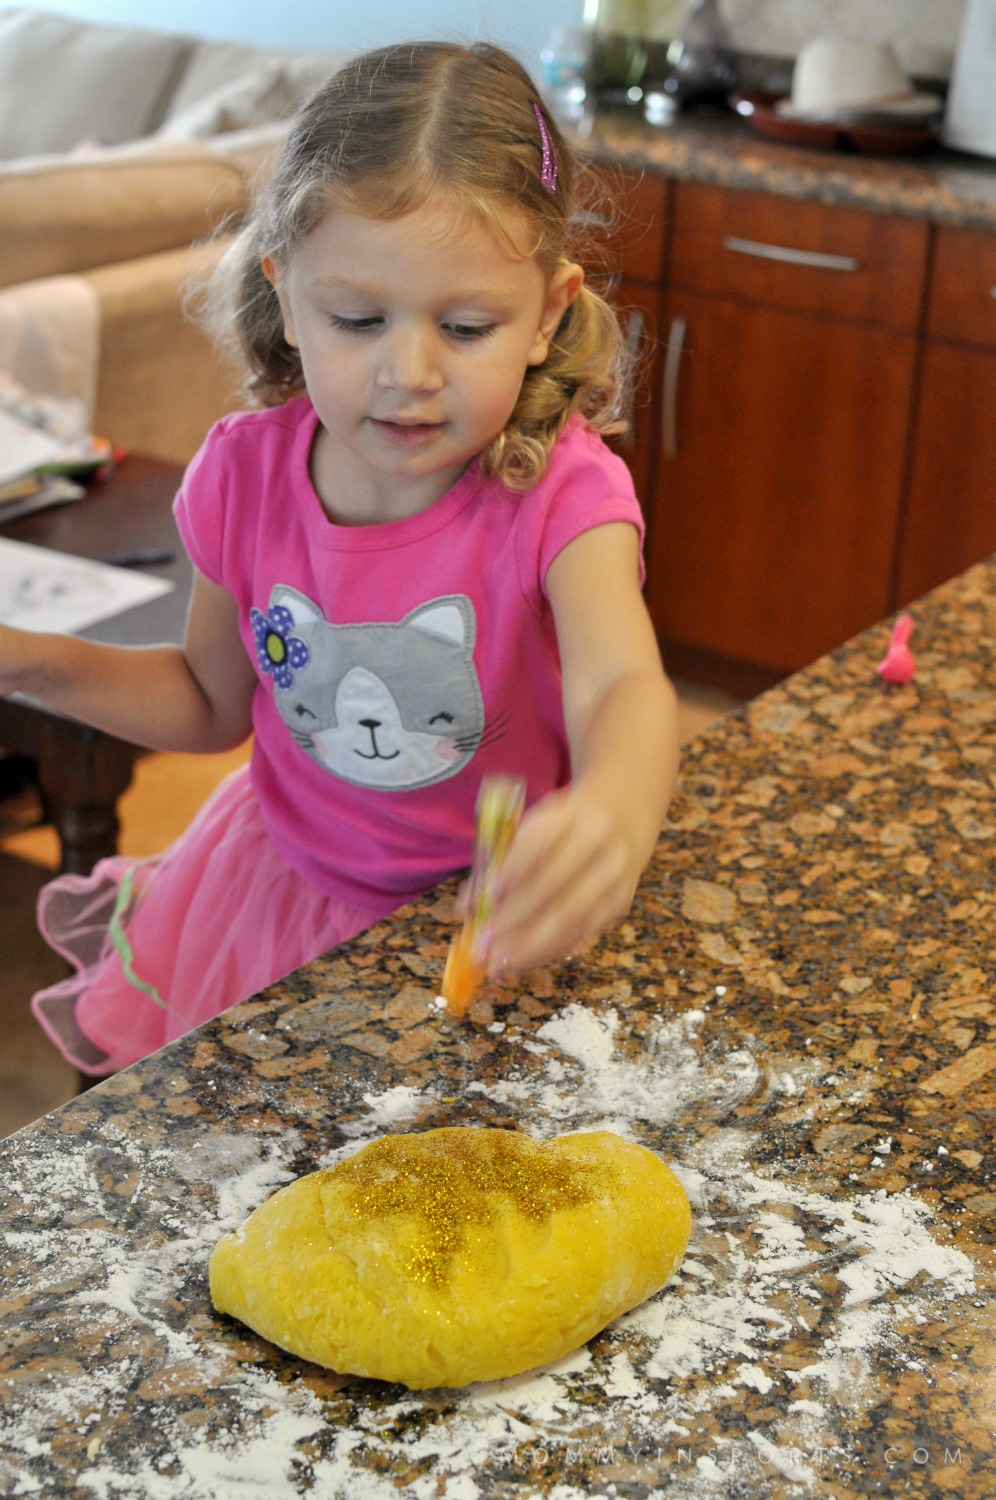 Looking for a fun activity for the kids while you cook on Thanksgiving? Try making this fun Thanksgiving Play dough recipe! Make it the day before and watch them create!